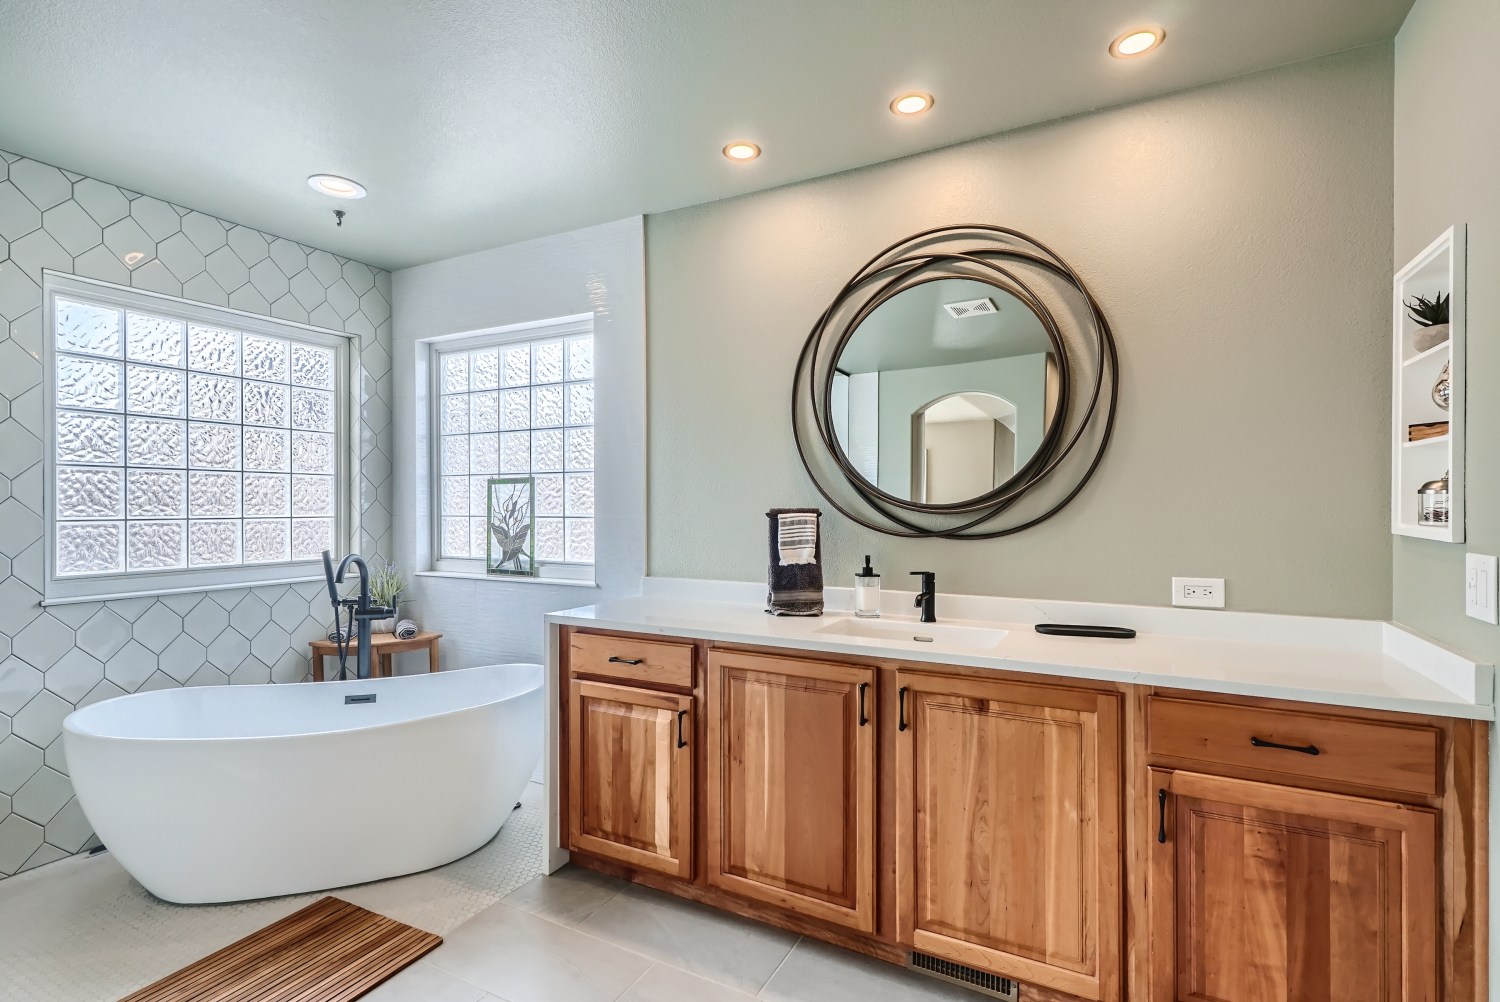 What to know before starting a bathroom remodel